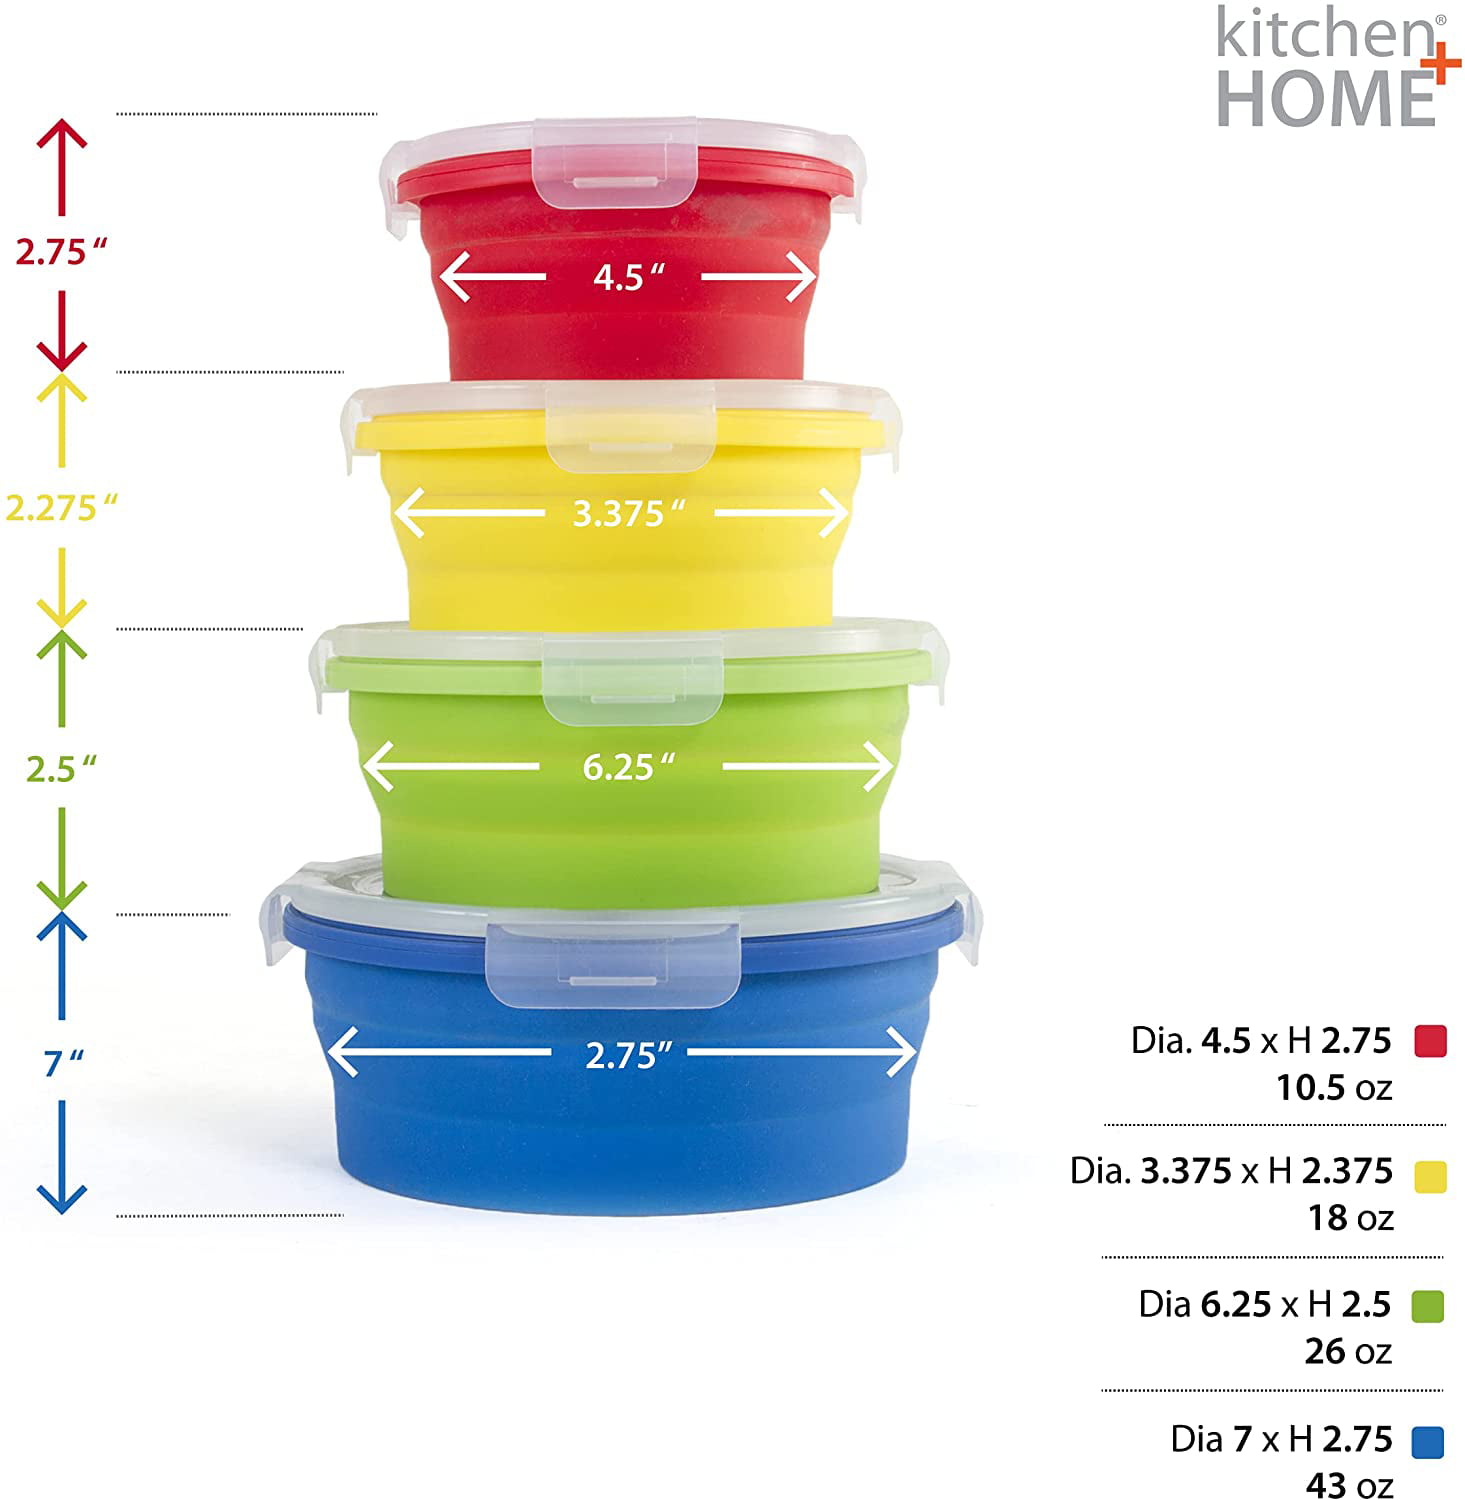  ICHC Set of 4 Collapsible Food Storage Containers